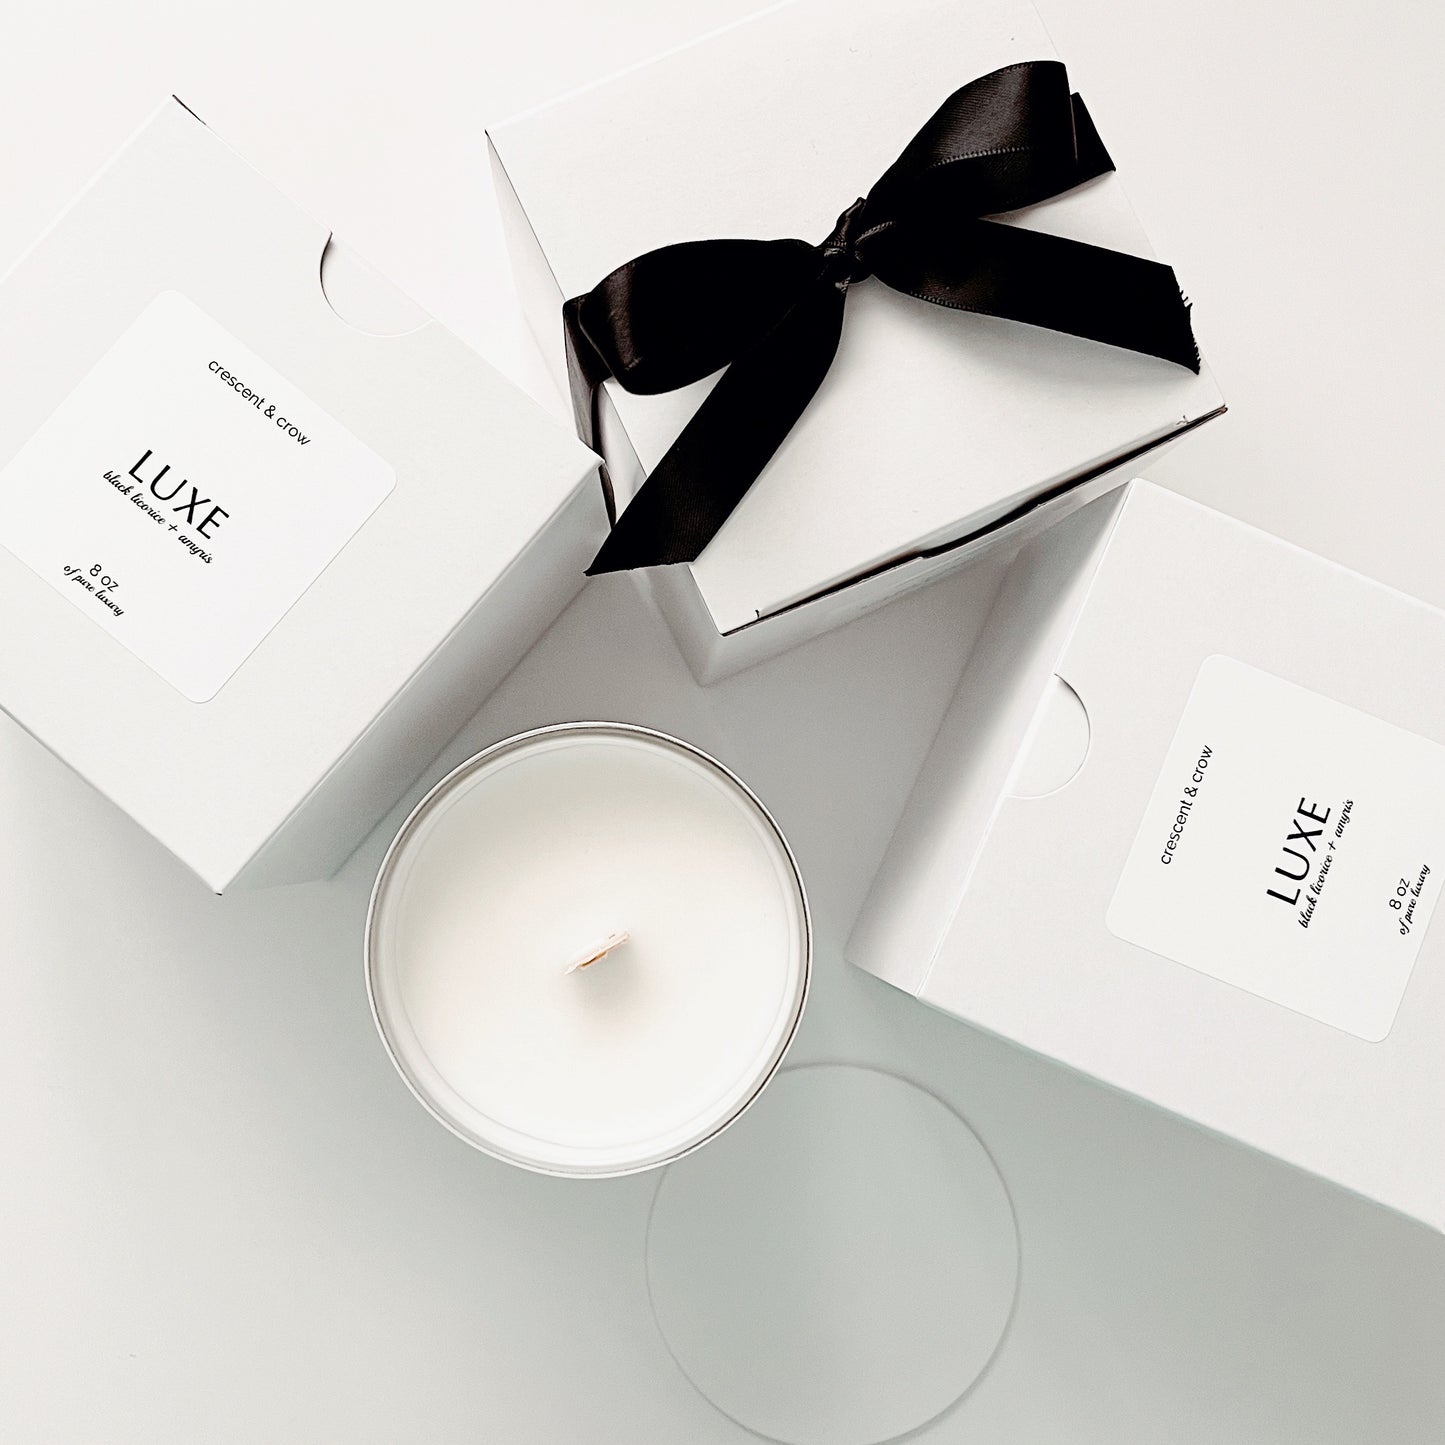 Luxe Luxury Candle in Black Licorice + Amyris